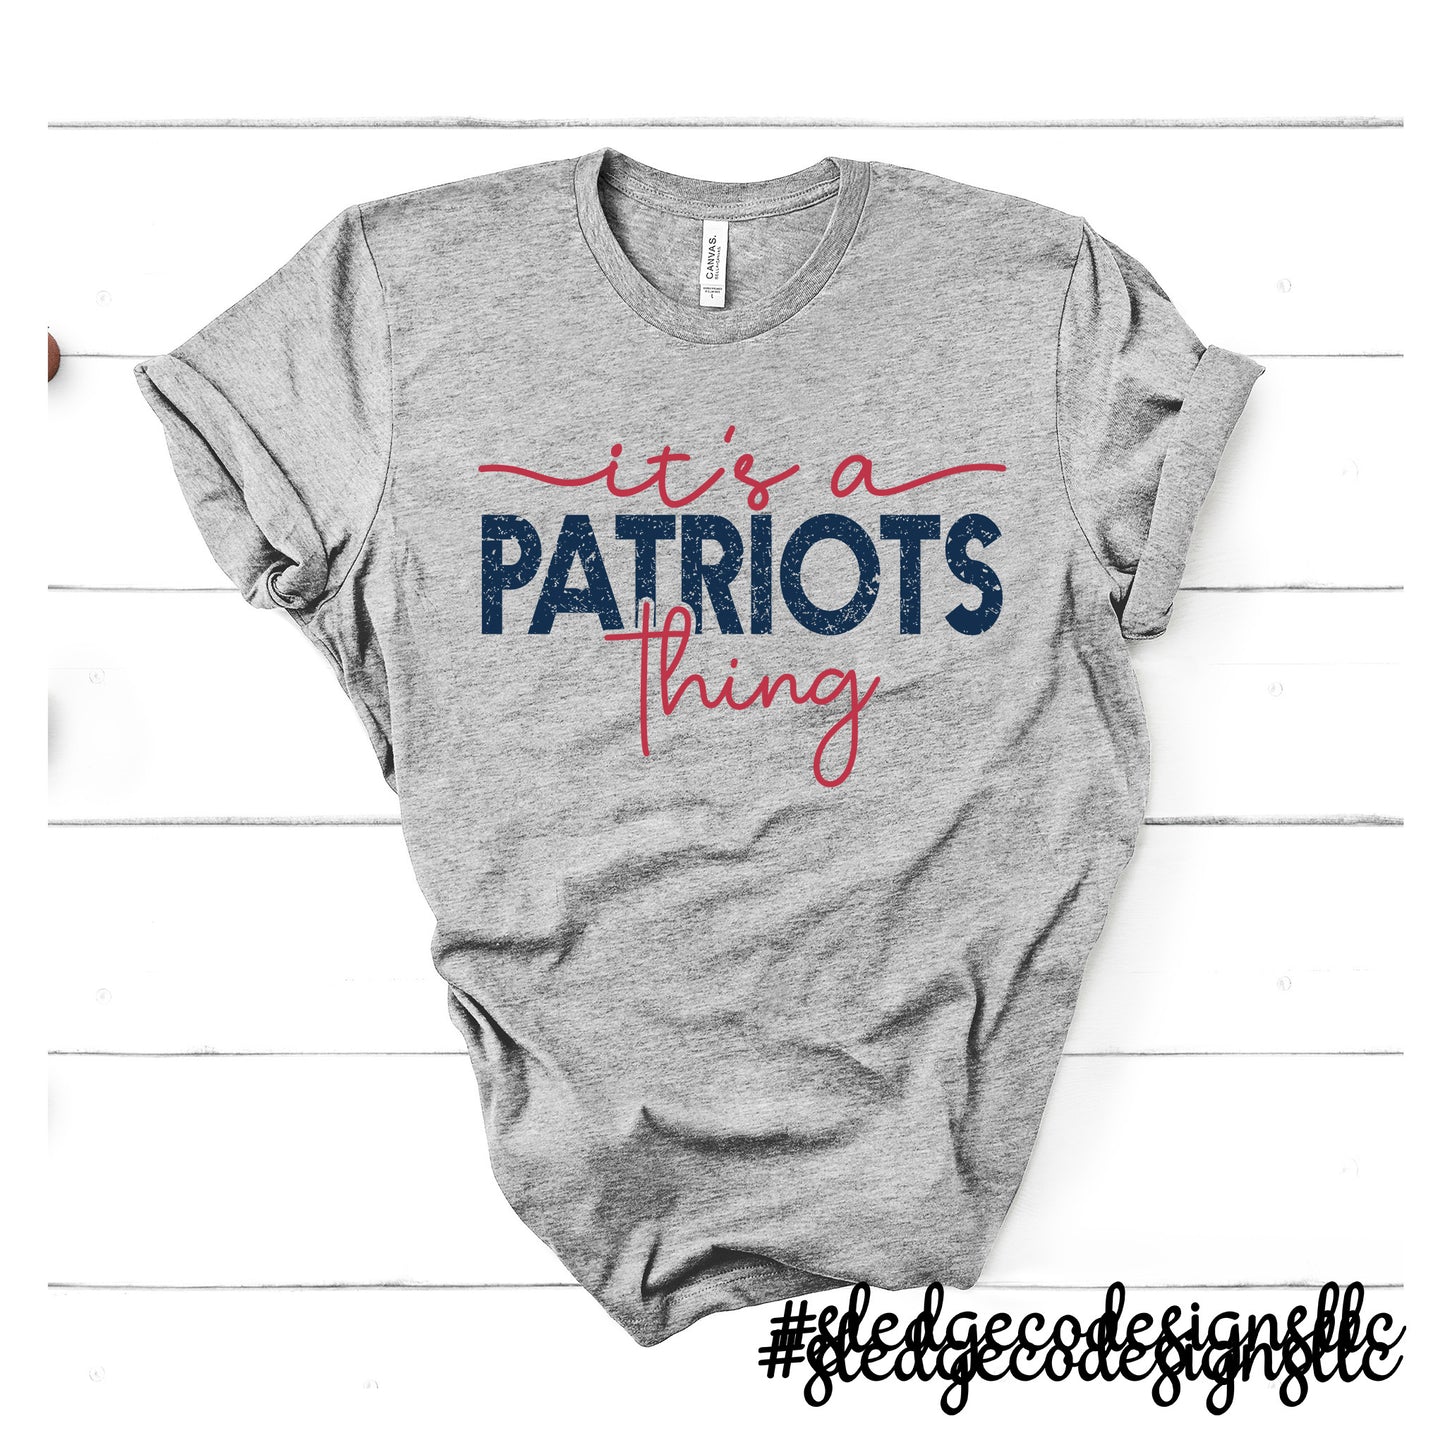 IT'S A PATRIOTS THING | ADULT - YOUTH - TODDLER |  UNISEX Custom Tshirt